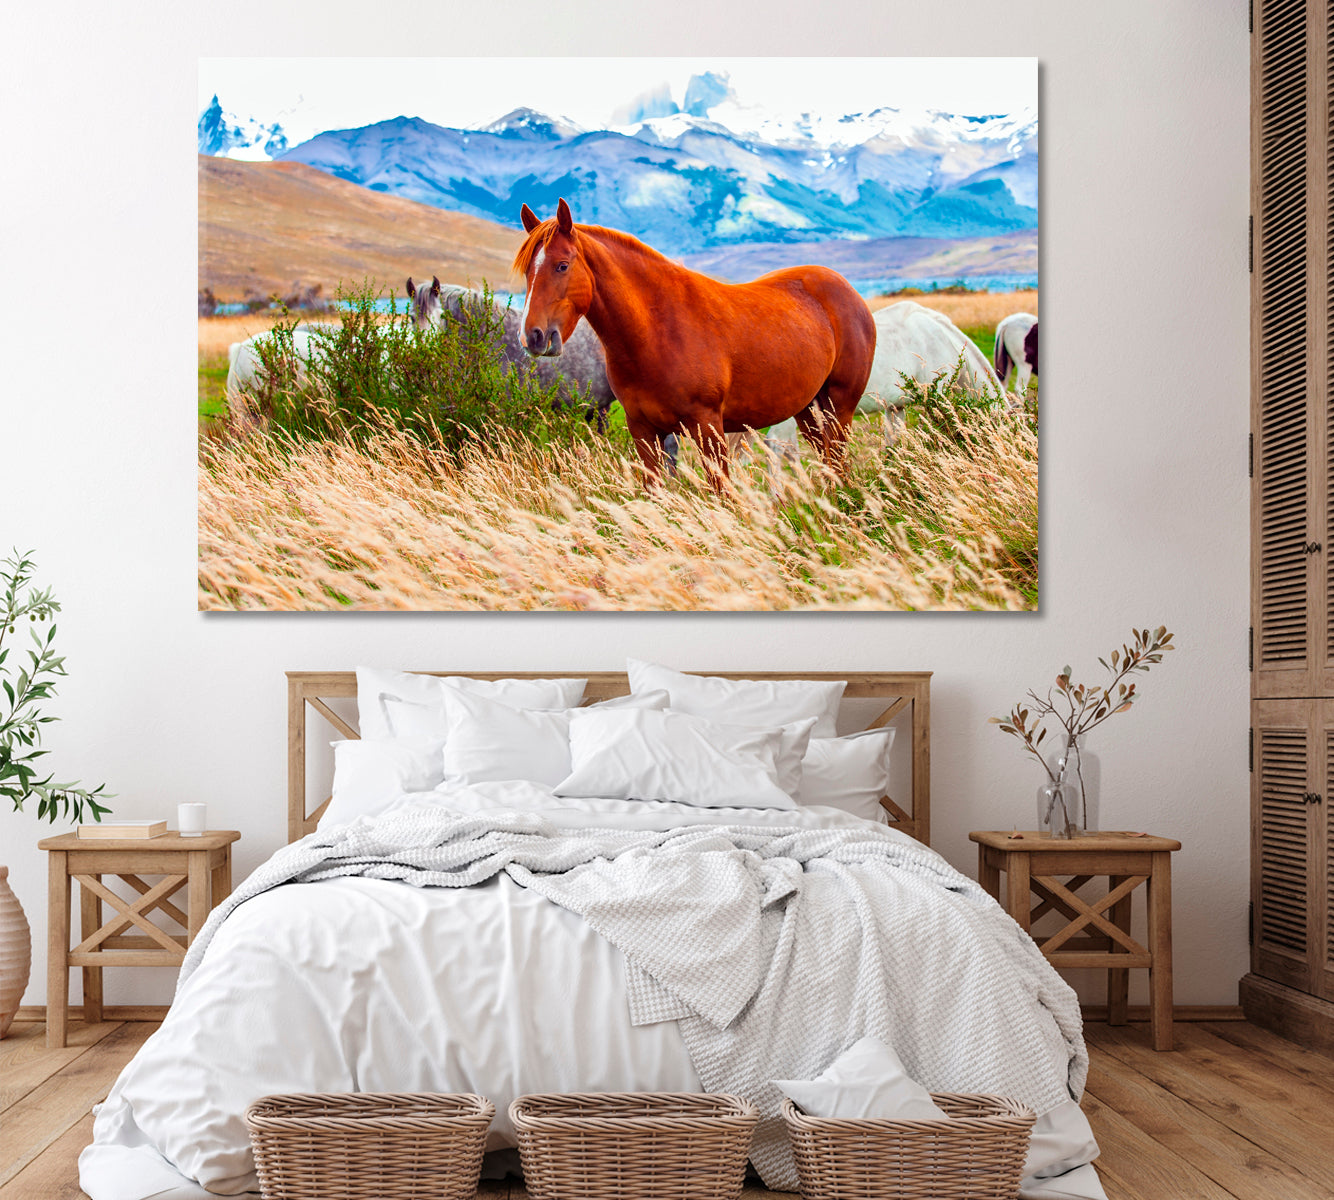 Horses in Torres del Paine Park Chile Canvas Print ArtLexy 1 Panel 24"x16" inches 